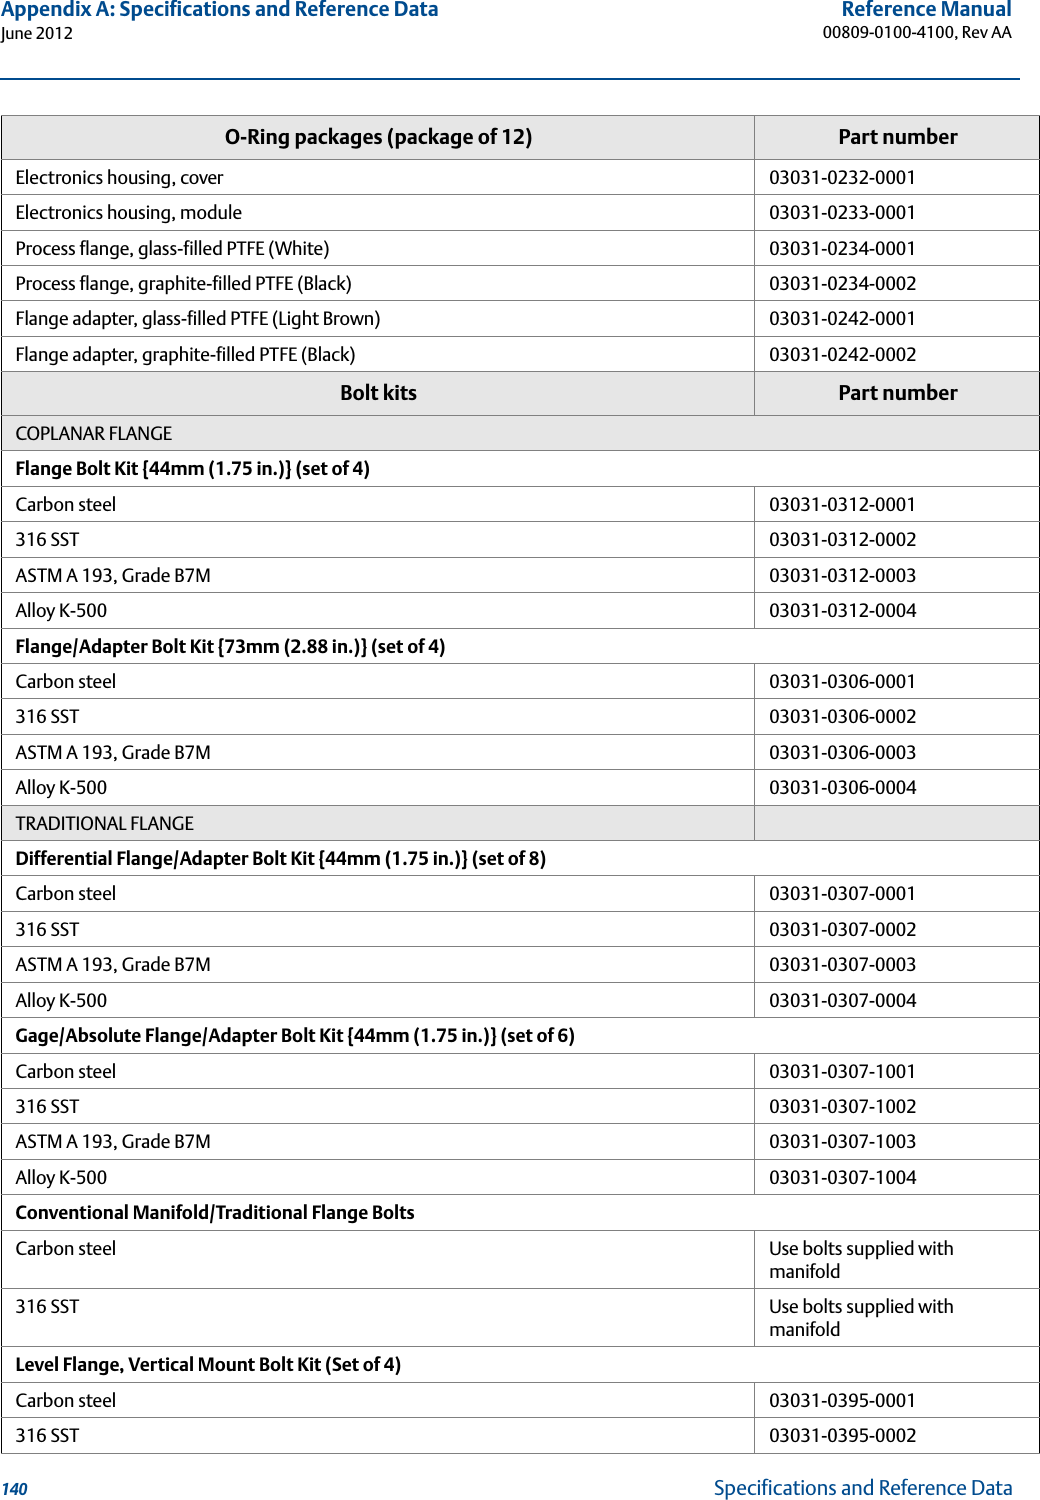 140Reference Manual00809-0100-4100, Rev AAAppendix A: Specifications and Reference DataJune 2012Specifications and Reference DataO-Ring packages (package of 12) Part numberElectronics housing, cover 03031-0232-0001Electronics housing, module 03031-0233-0001Process flange, glass-filled PTFE (White) 03031-0234-0001Process flange, graphite-filled PTFE (Black) 03031-0234-0002Flange adapter, glass-filled PTFE (Light Brown) 03031-0242-0001Flange adapter, graphite-filled PTFE (Black) 03031-0242-0002Bolt kits Part numberCOPLANAR FLANGEFlange Bolt Kit {44mm (1.75 in.)} (set of 4)Carbon steel 03031-0312-0001316 SST 03031-0312-0002ASTM A 193, Grade B7M 03031-0312-0003Alloy K-500 03031-0312-0004Flange/Adapter Bolt Kit {73mm (2.88 in.)} (set of 4)Carbon steel 03031-0306-0001316 SST 03031-0306-0002ASTM A 193, Grade B7M 03031-0306-0003Alloy K-500 03031-0306-0004TRADITIONAL FLANGEDifferential Flange/Adapter Bolt Kit {44mm (1.75 in.)} (set of 8)Carbon steel 03031-0307-0001316 SST 03031-0307-0002ASTM A 193, Grade B7M 03031-0307-0003Alloy K-500 03031-0307-0004Gage/Absolute Flange/Adapter Bolt Kit {44mm (1.75 in.)} (set of 6)Carbon steel 03031-0307-1001316 SST 03031-0307-1002ASTM A 193, Grade B7M 03031-0307-1003Alloy K-500 03031-0307-1004Conventional Manifold/Traditional Flange BoltsCarbon steel Use bolts supplied with manifold316 SST Use bolts supplied with manifoldLevel Flange, Vertical Mount Bolt Kit (Set of 4)Carbon steel 03031-0395-0001316 SST 03031-0395-0002